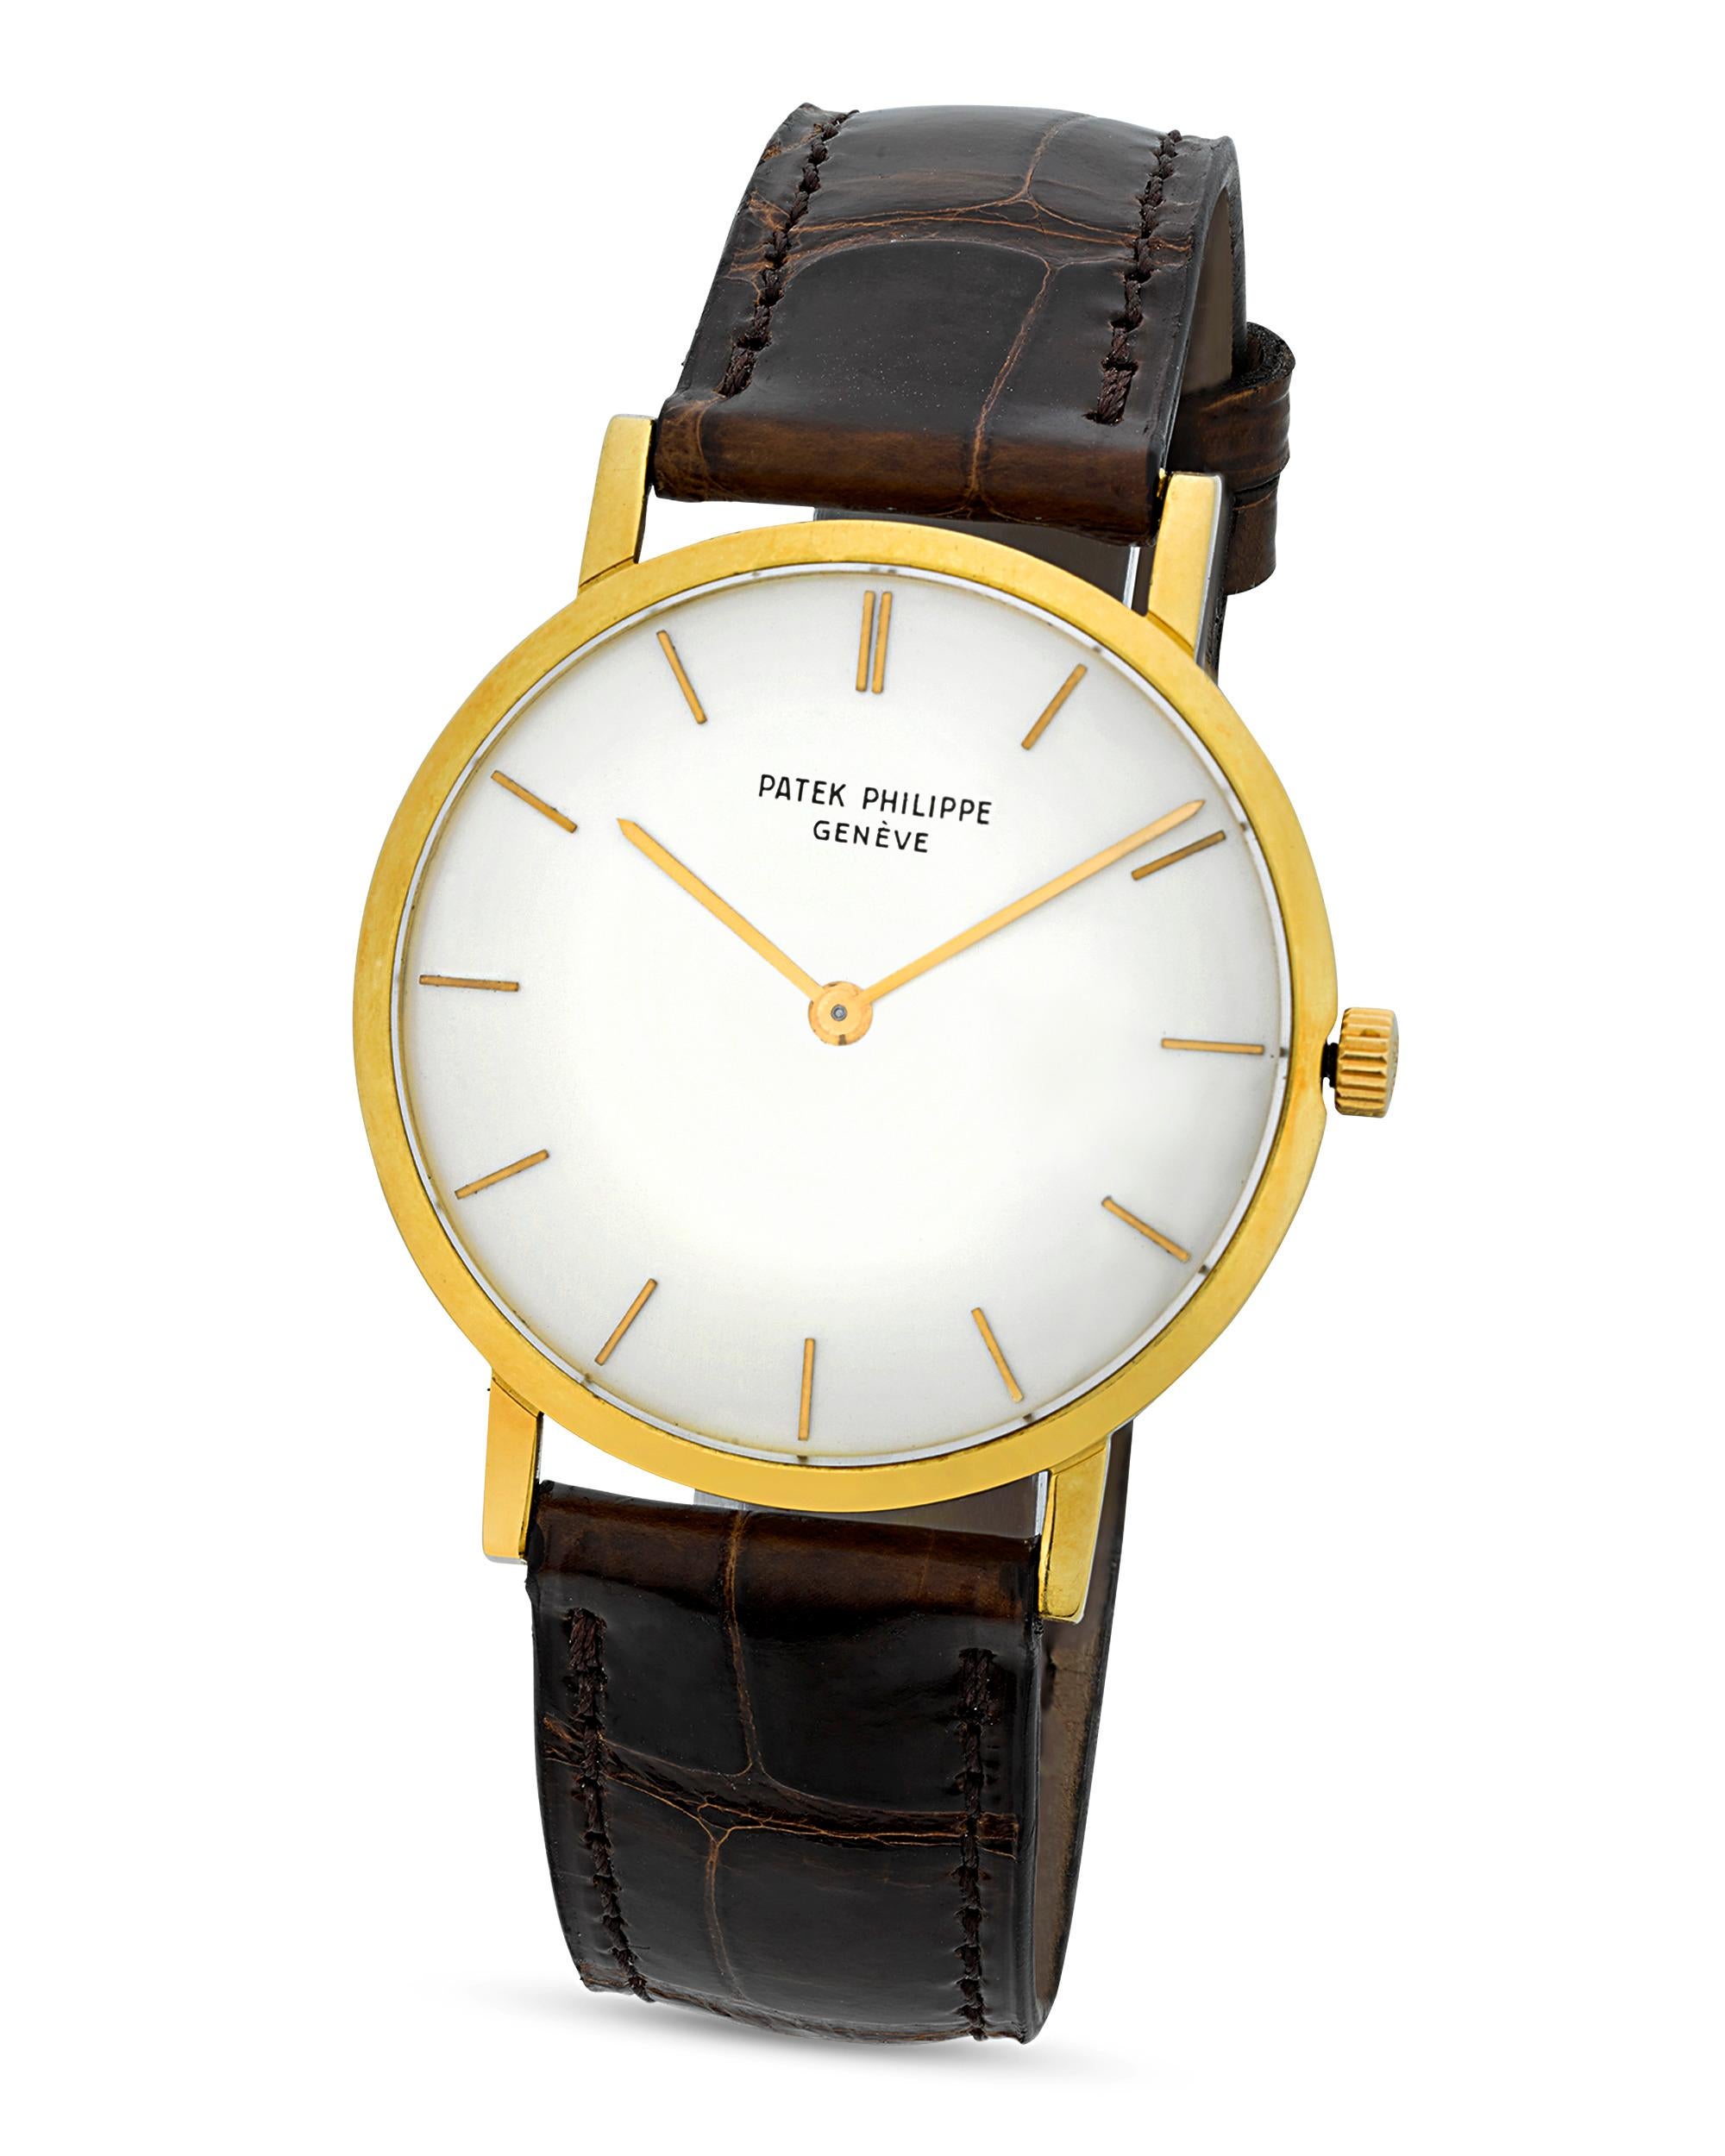 Patek Philippe's Calatrava line of wristwatches are considered the 